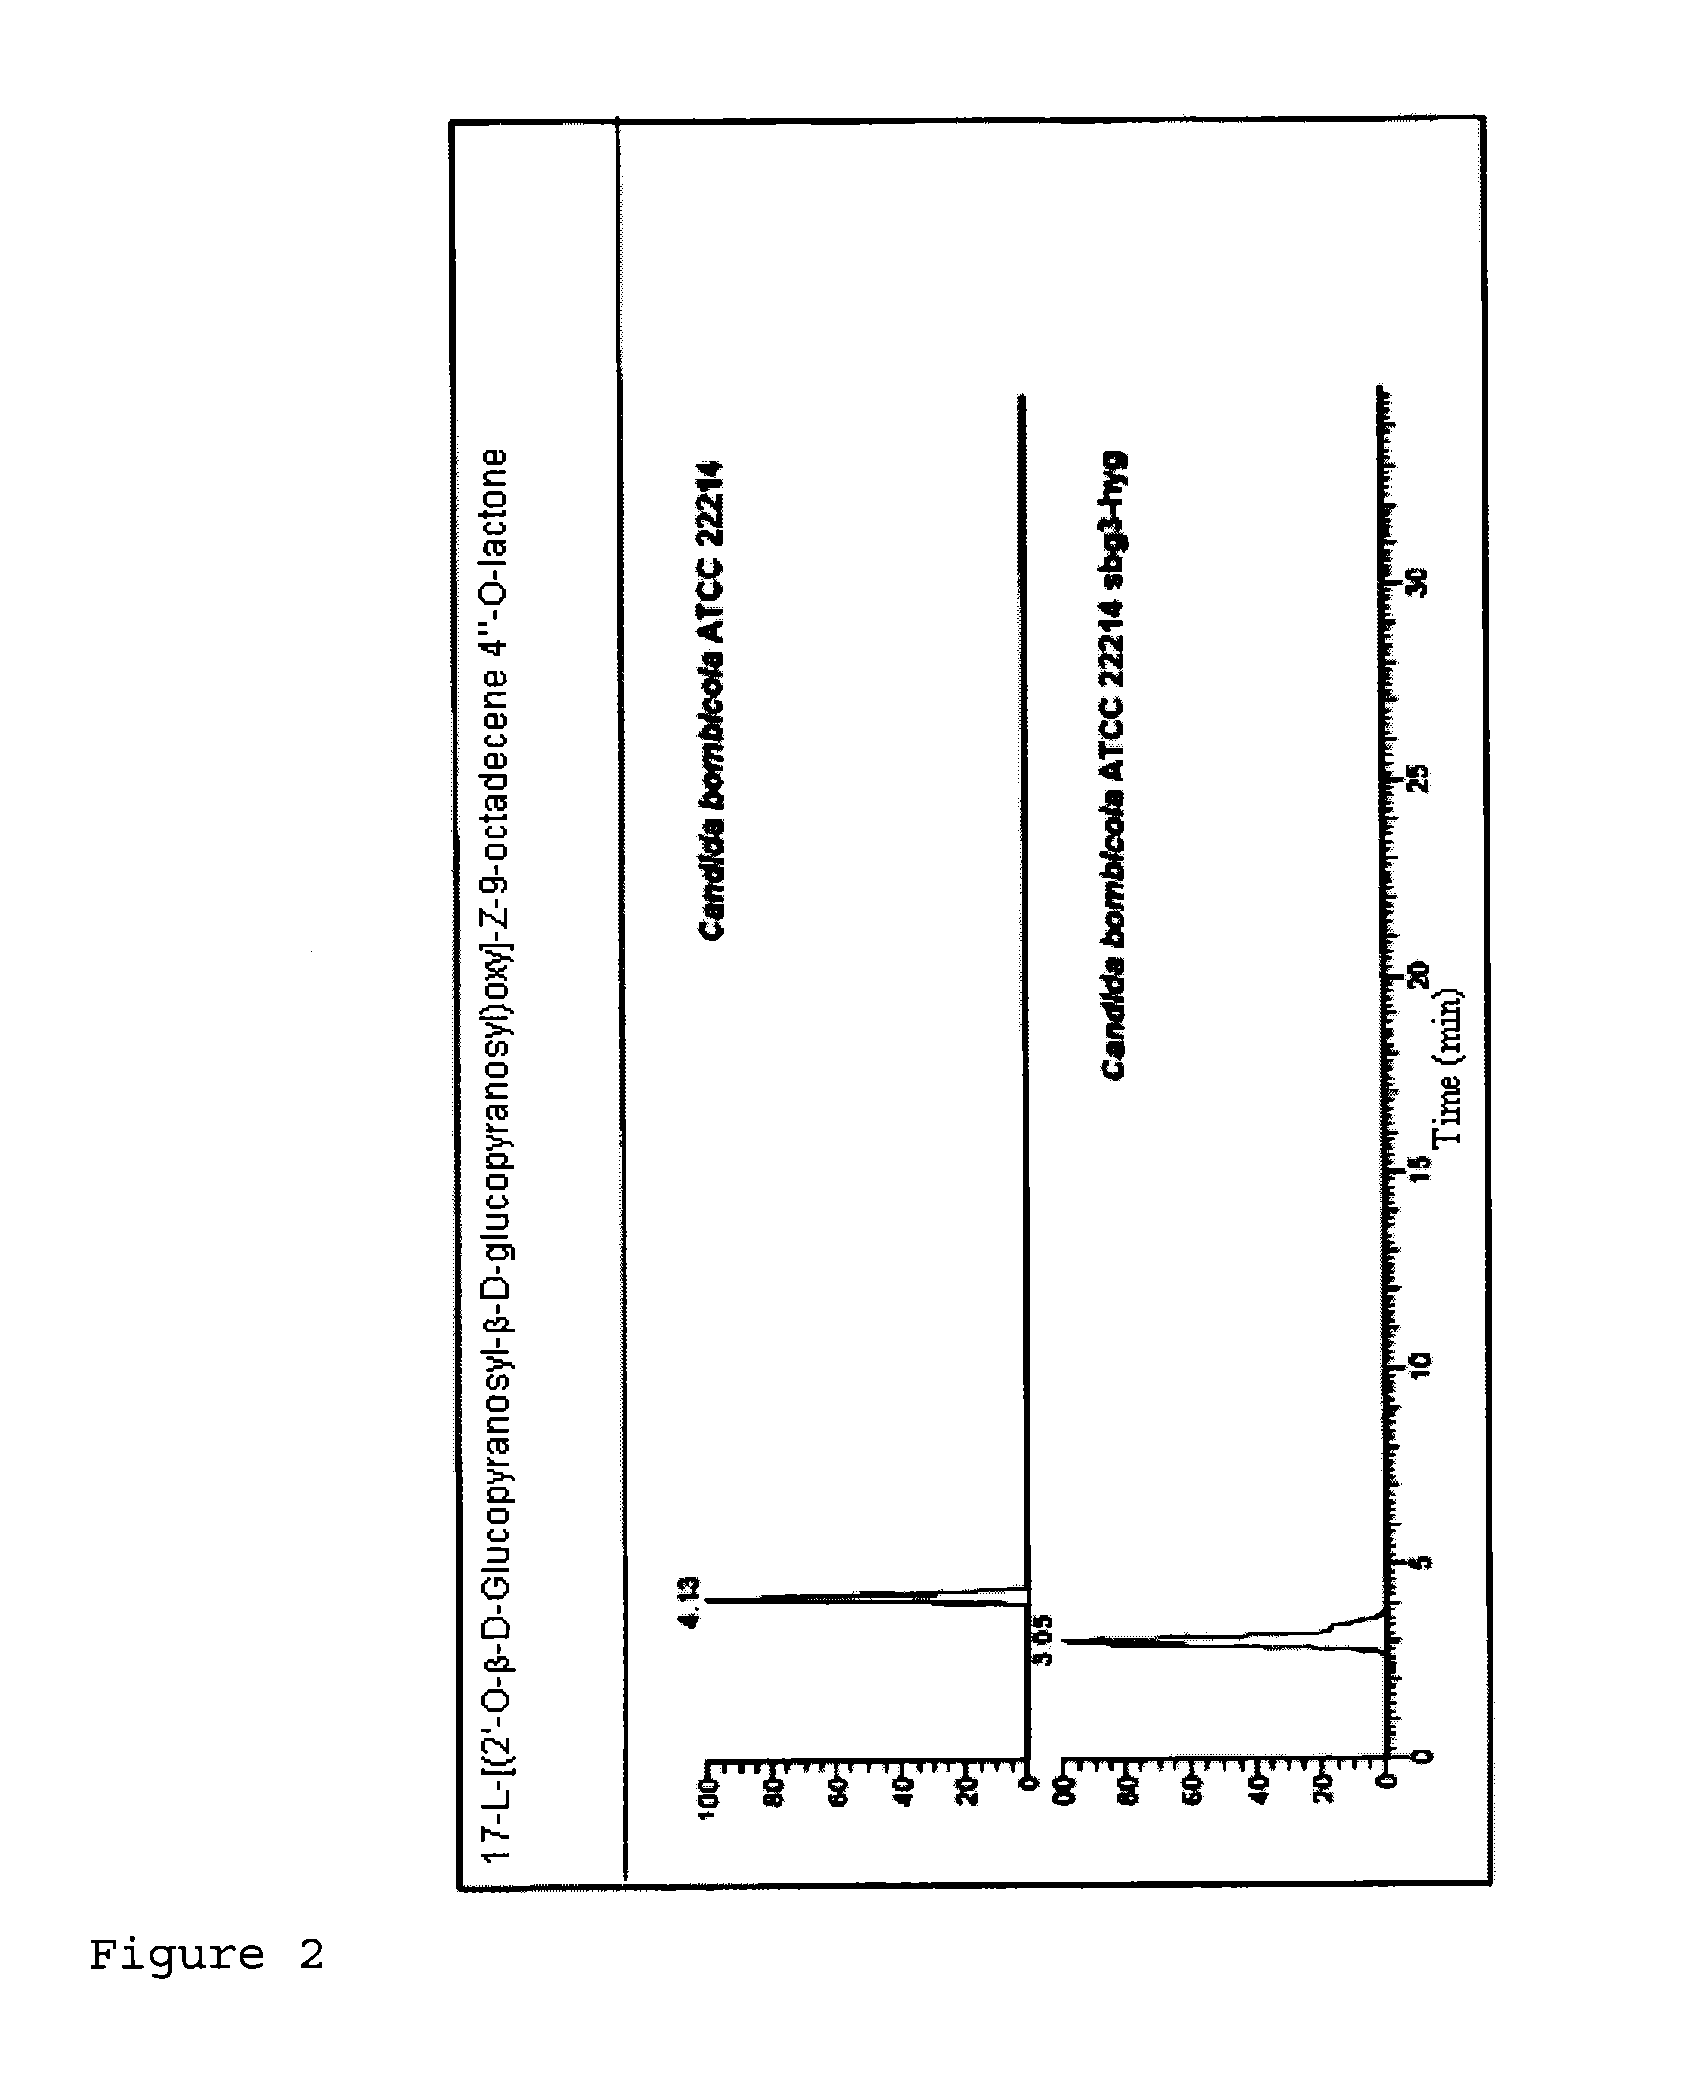 Cells, nucleic acids, enzymes and use thereof, and methods for the production of sophorolipids